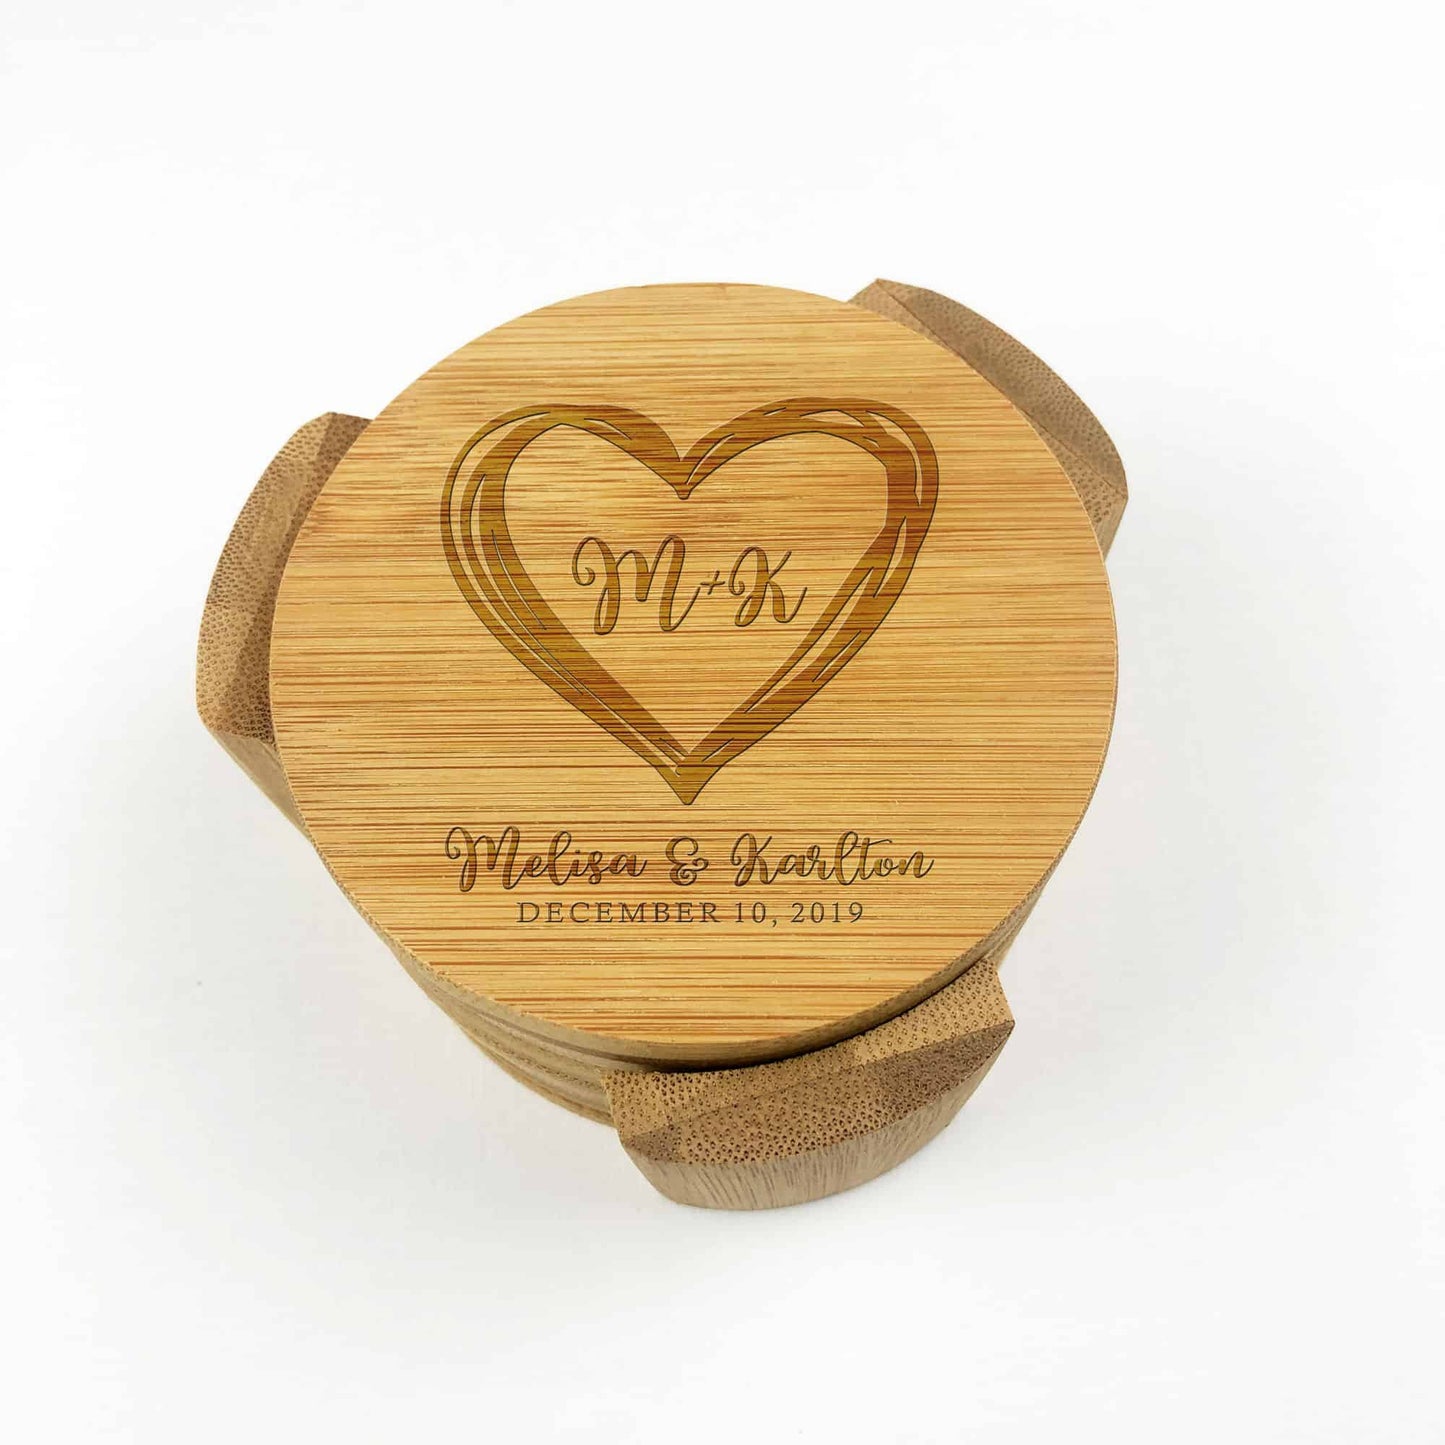 6 Pieces round Bamboo coasters Wedding Engagement Gift